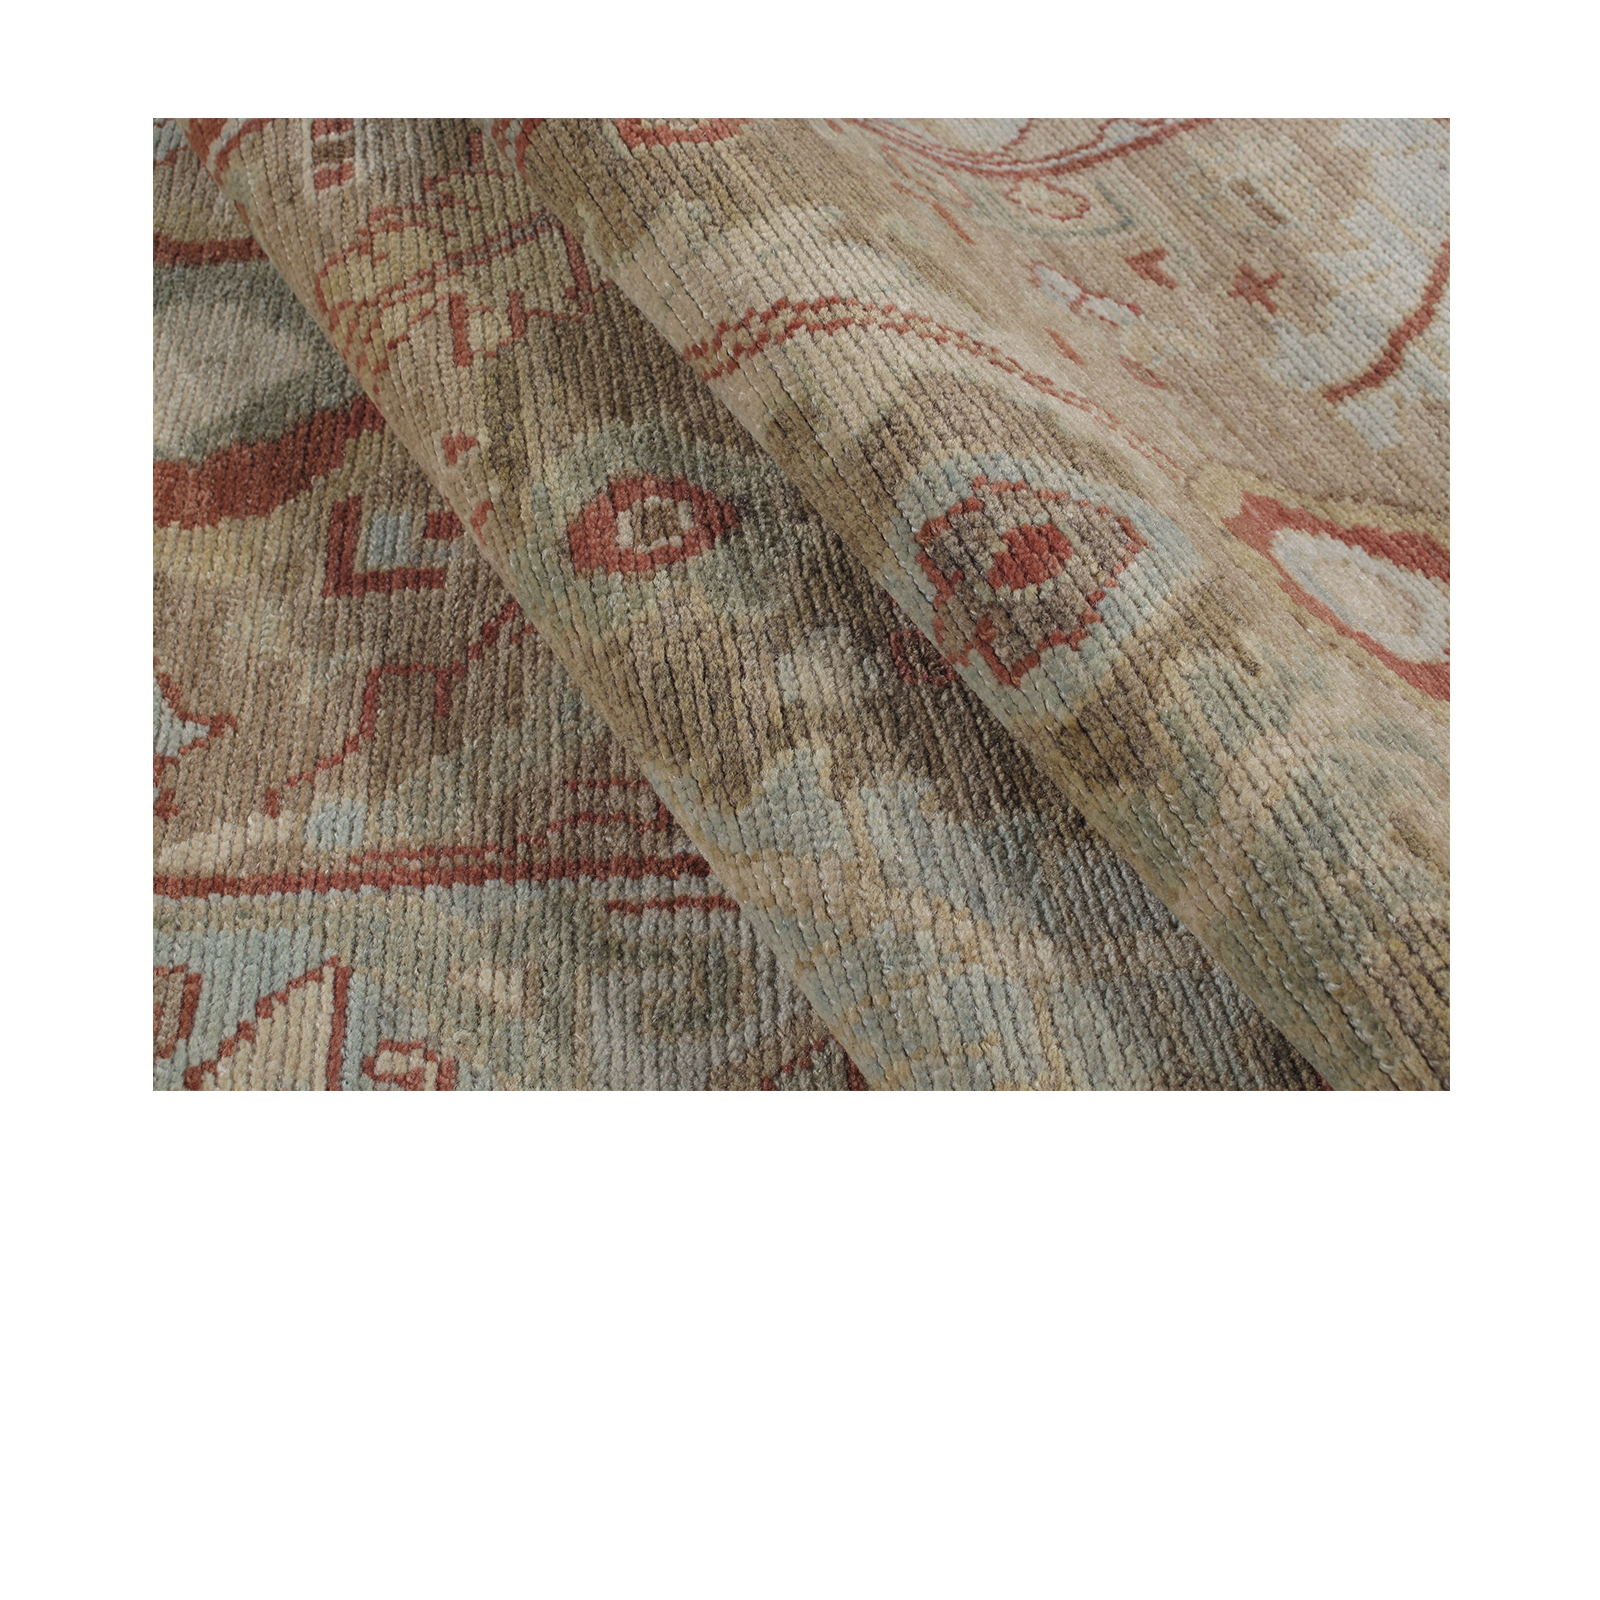 Camelhair Runner is hand-knotted and made with fine hand-spun wool. 